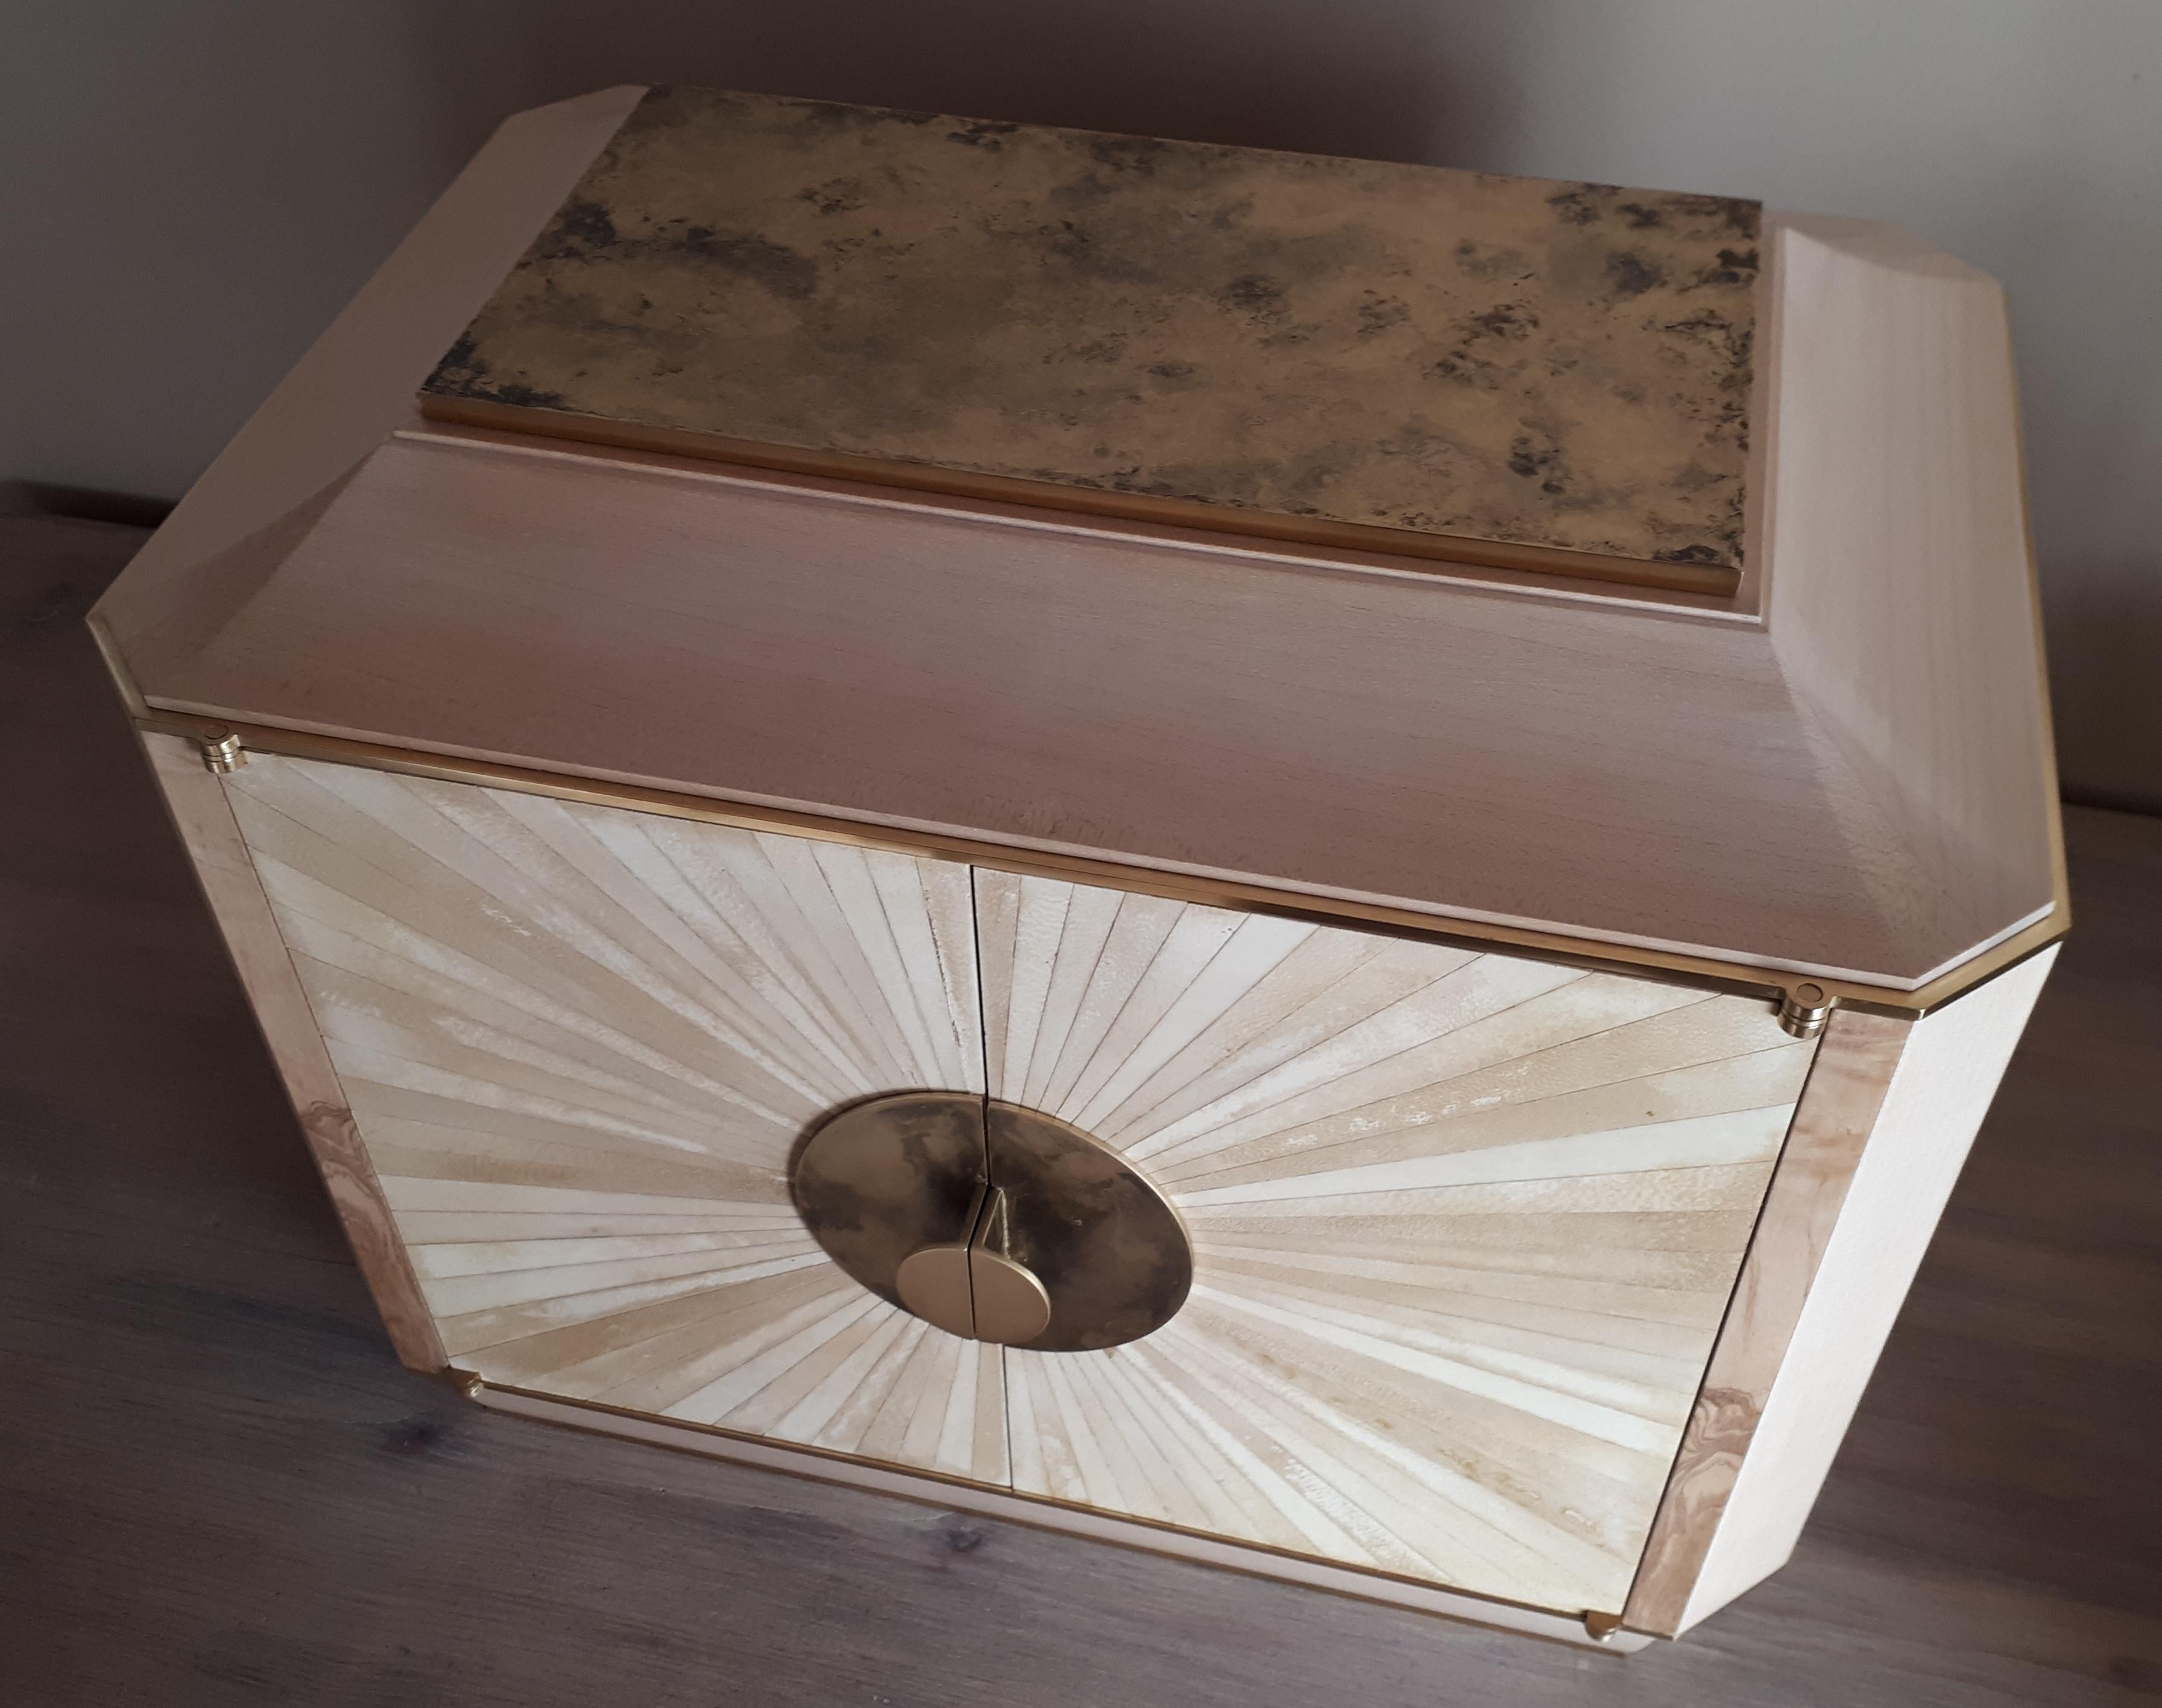 Cabinet in sycamore, ash-olive, brass, parchment and enamels with three drawers simulating nine.
Own creation.